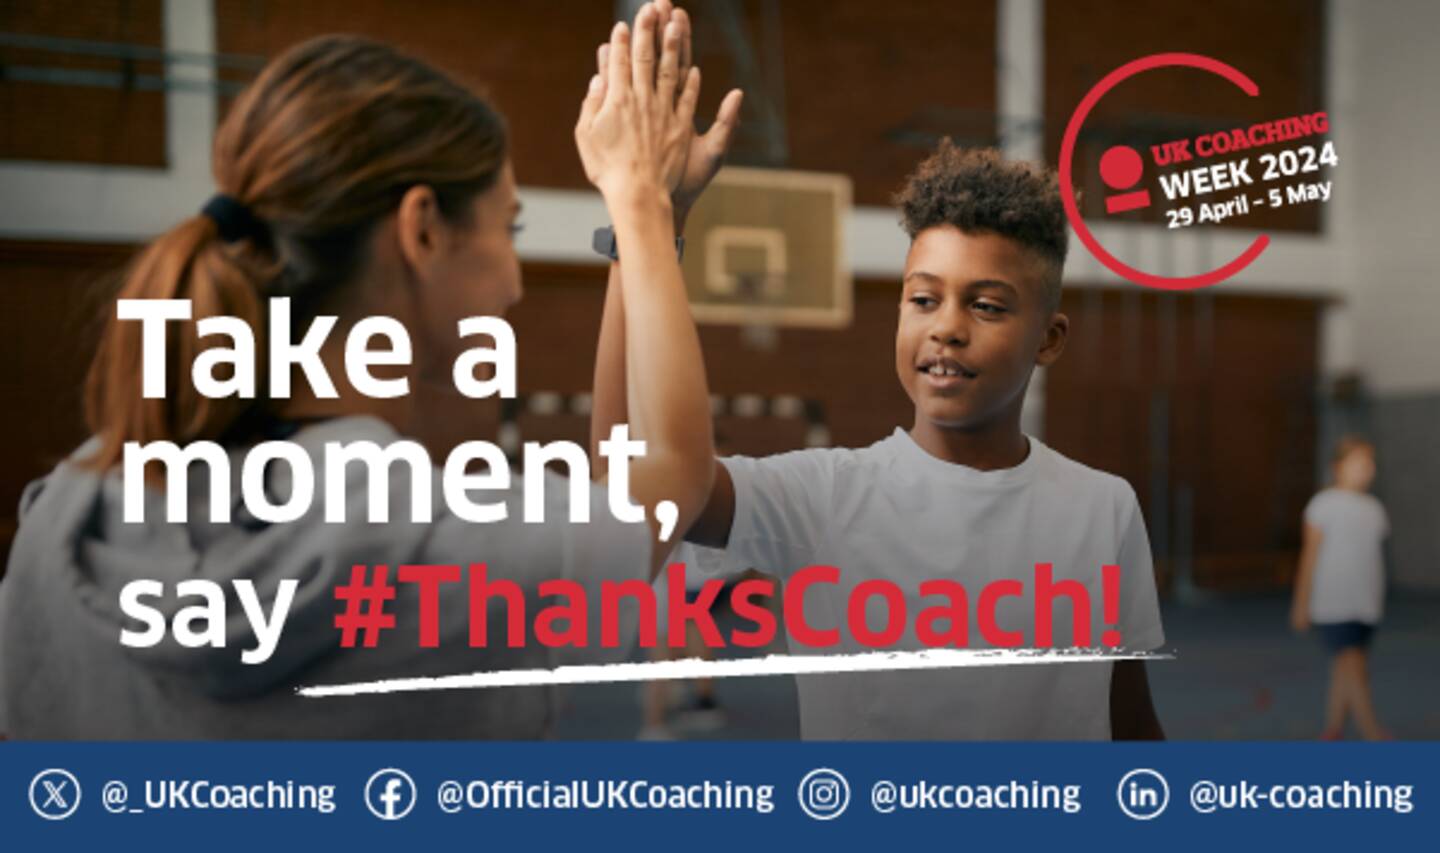 A image of a young boy 'high-fiving' his coach. There is a basketball court in the background. The text over the image says 'Take a moment, say #ThanksCoach!